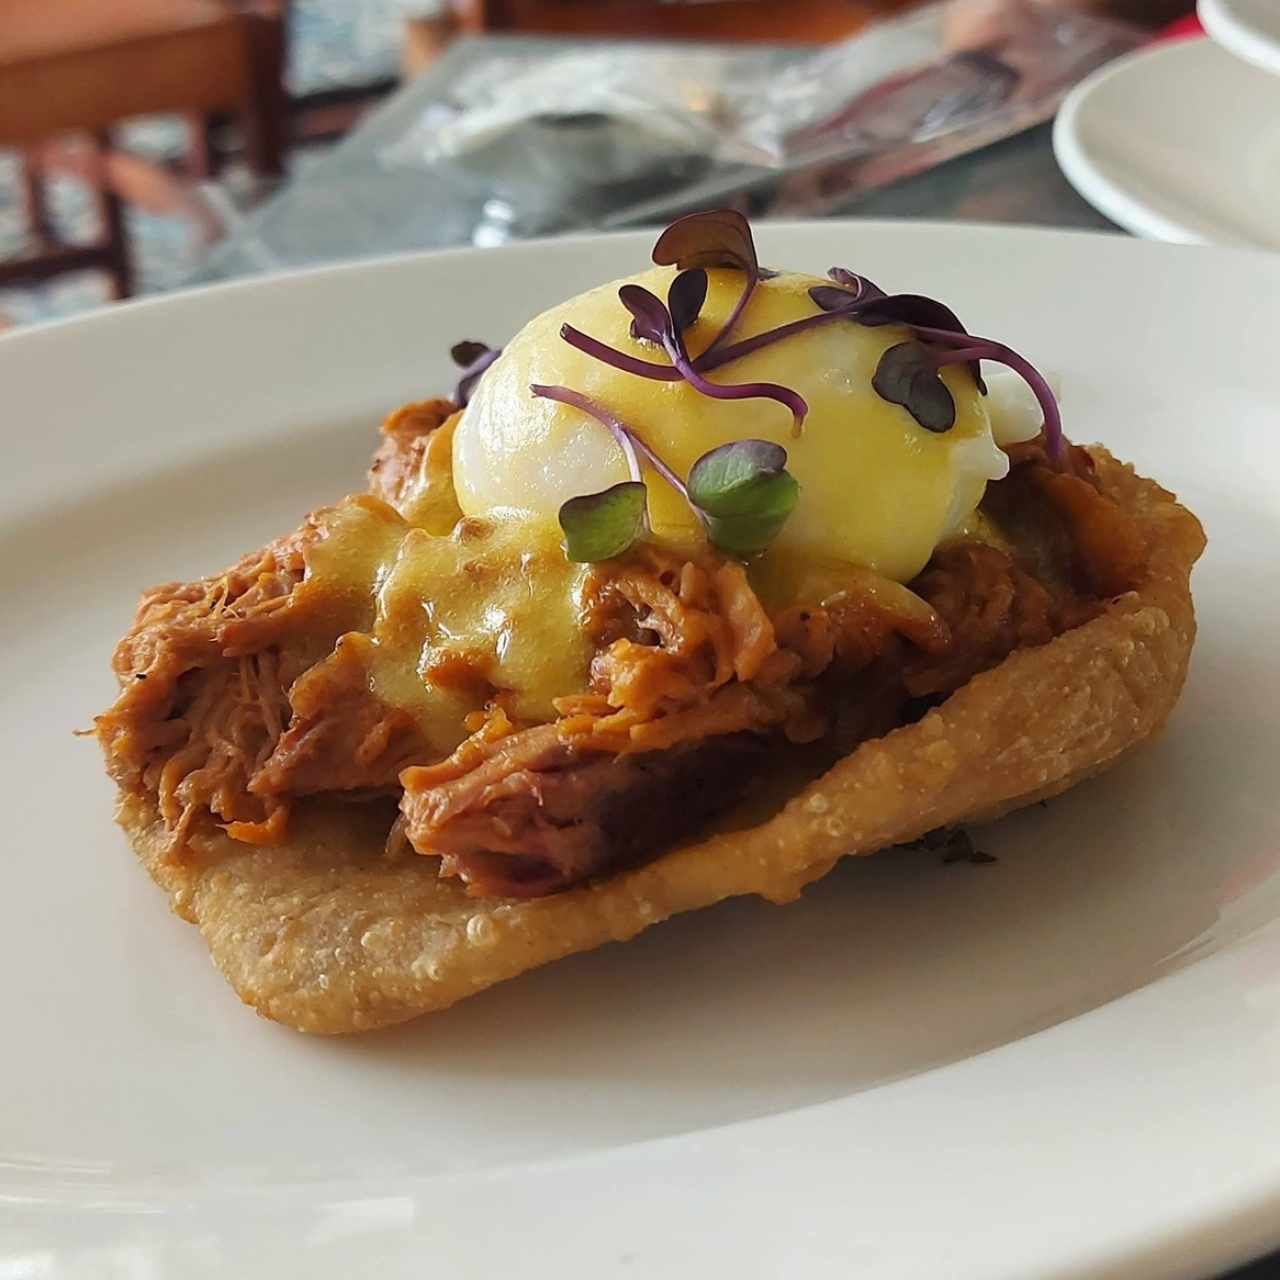 Poached egg with pulled pork